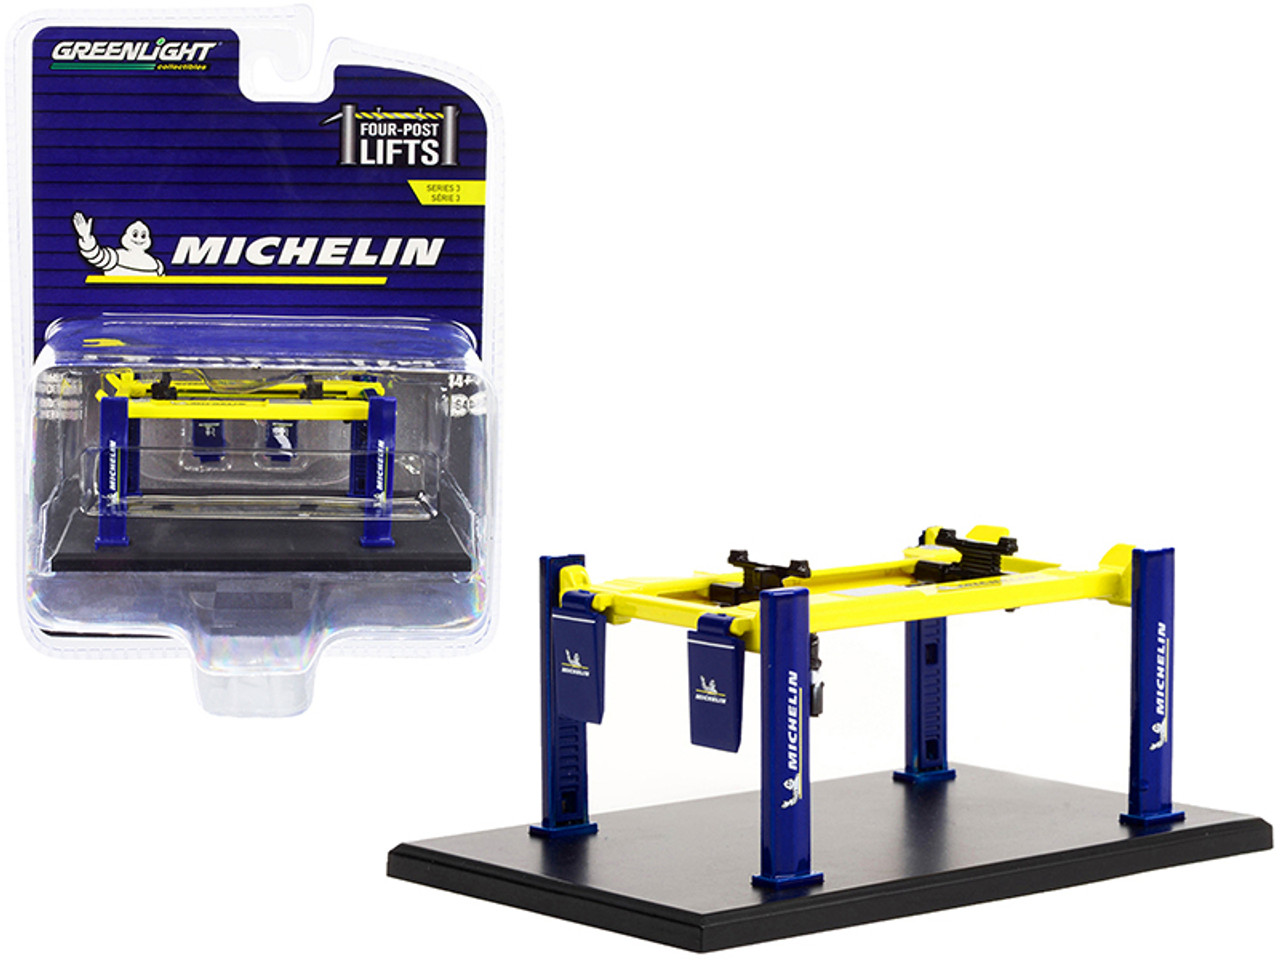 Adjustable Four-Post Lift "Michelin" Blue and Bright Yellow "Four-Post Lifts" Series 3 1/64 Diecast Model by Greenlight